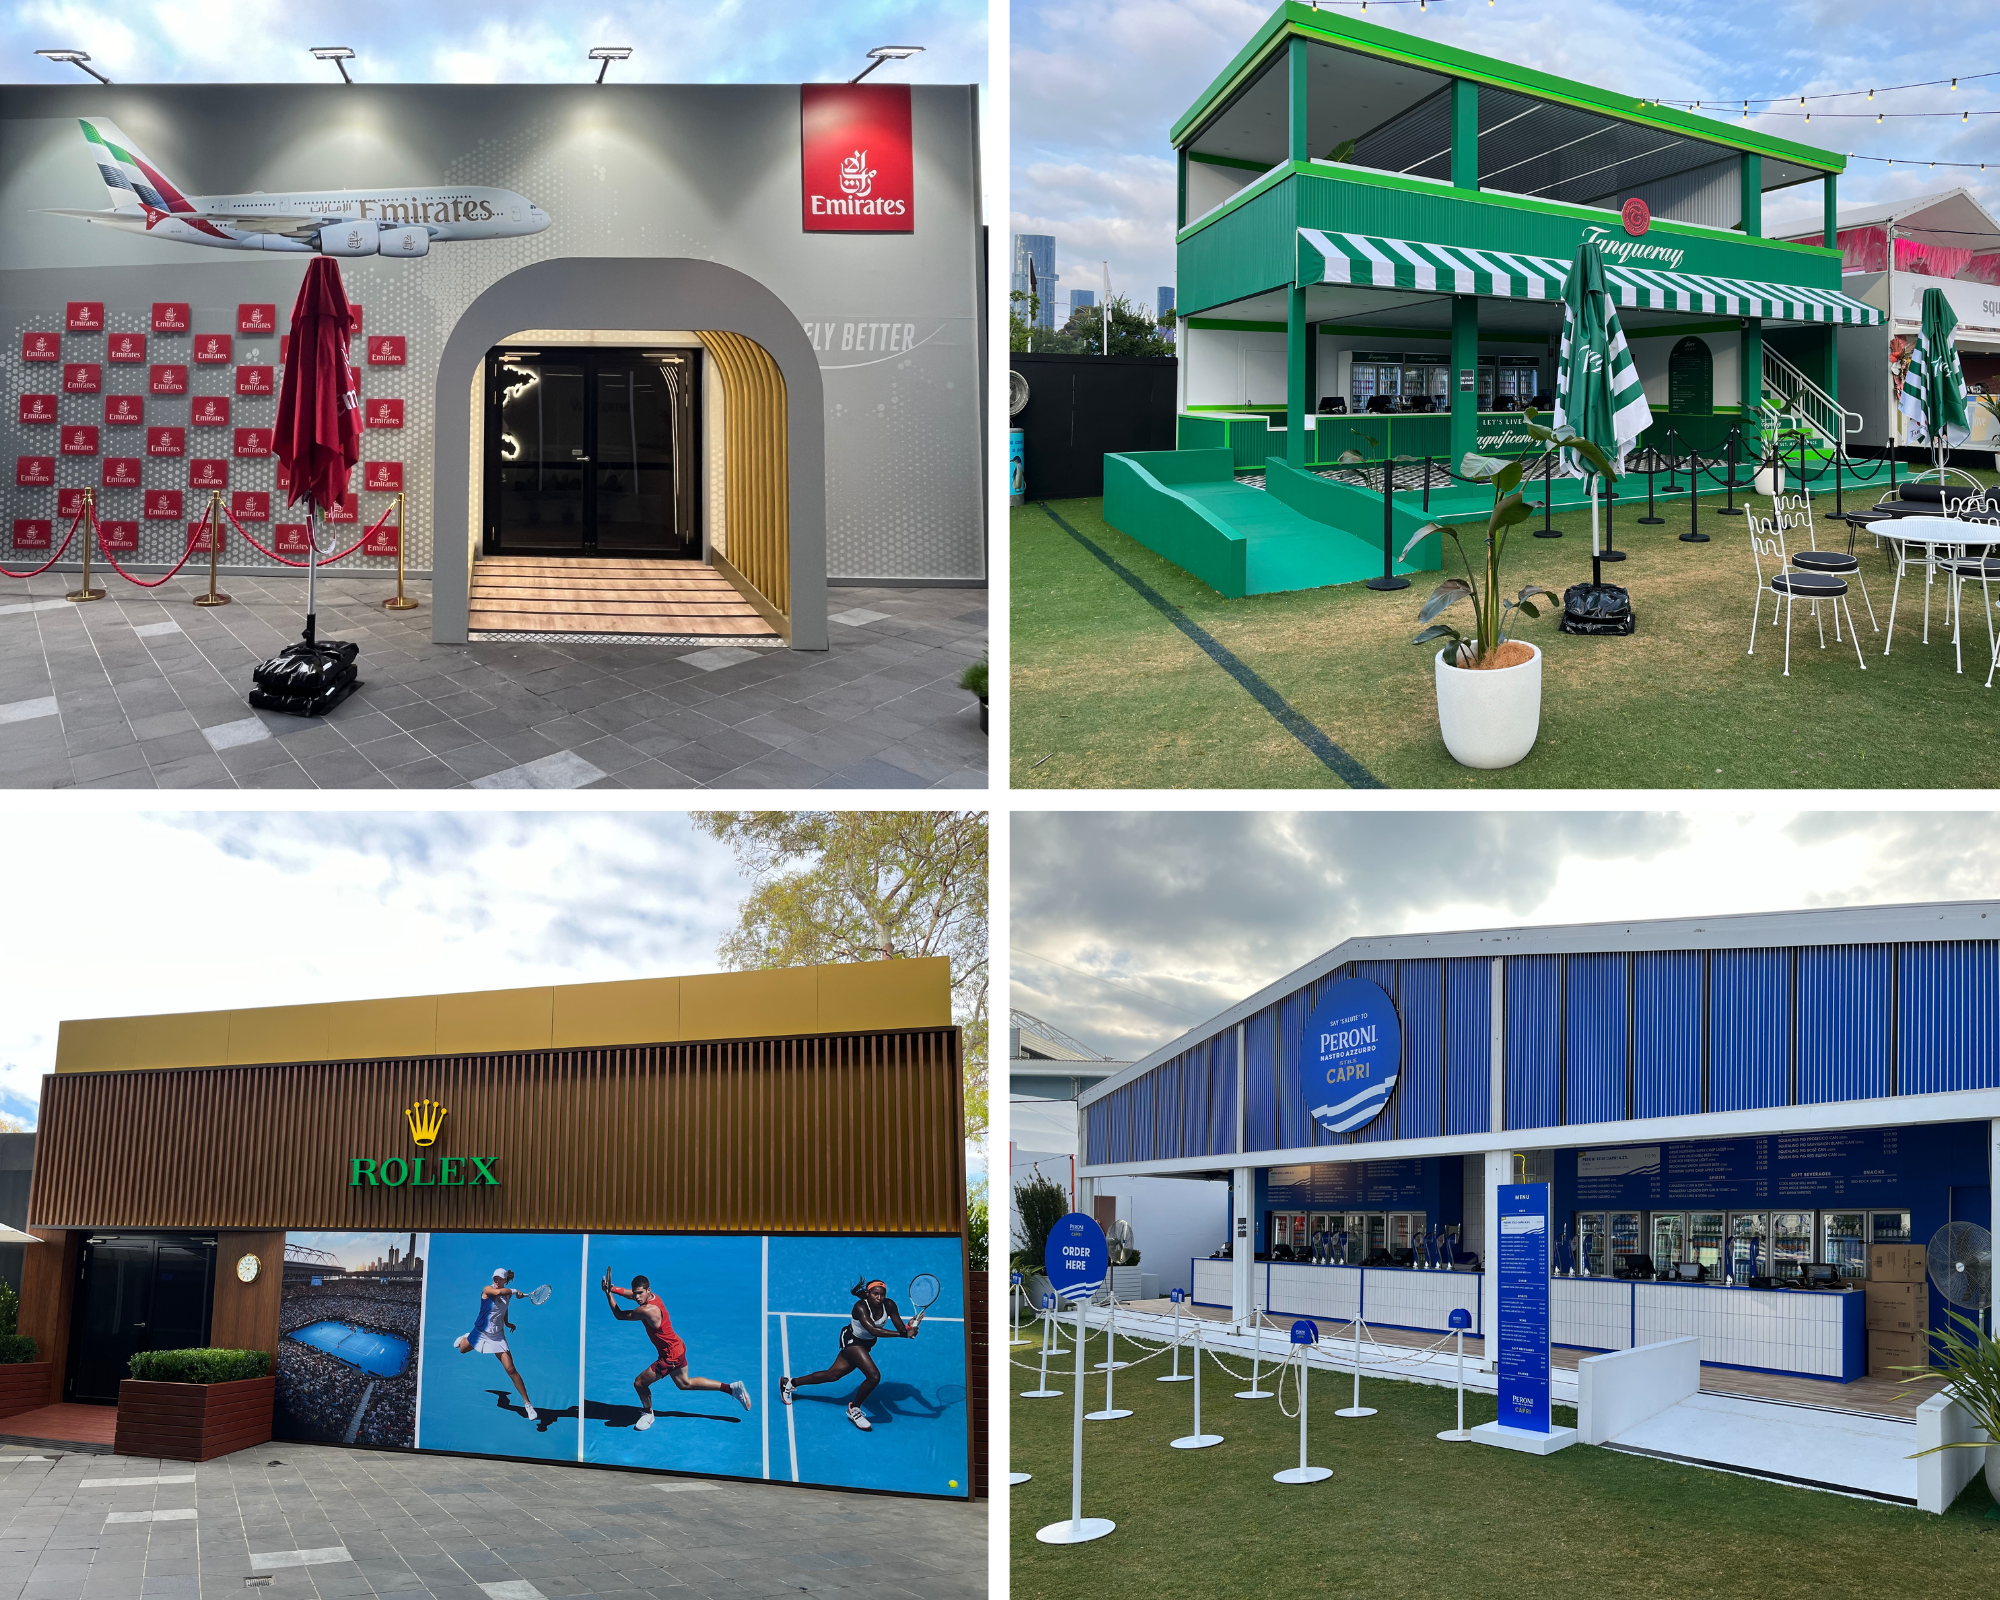 AO temporary structures - Emirates, Tanqueray, Rolex and Peroni